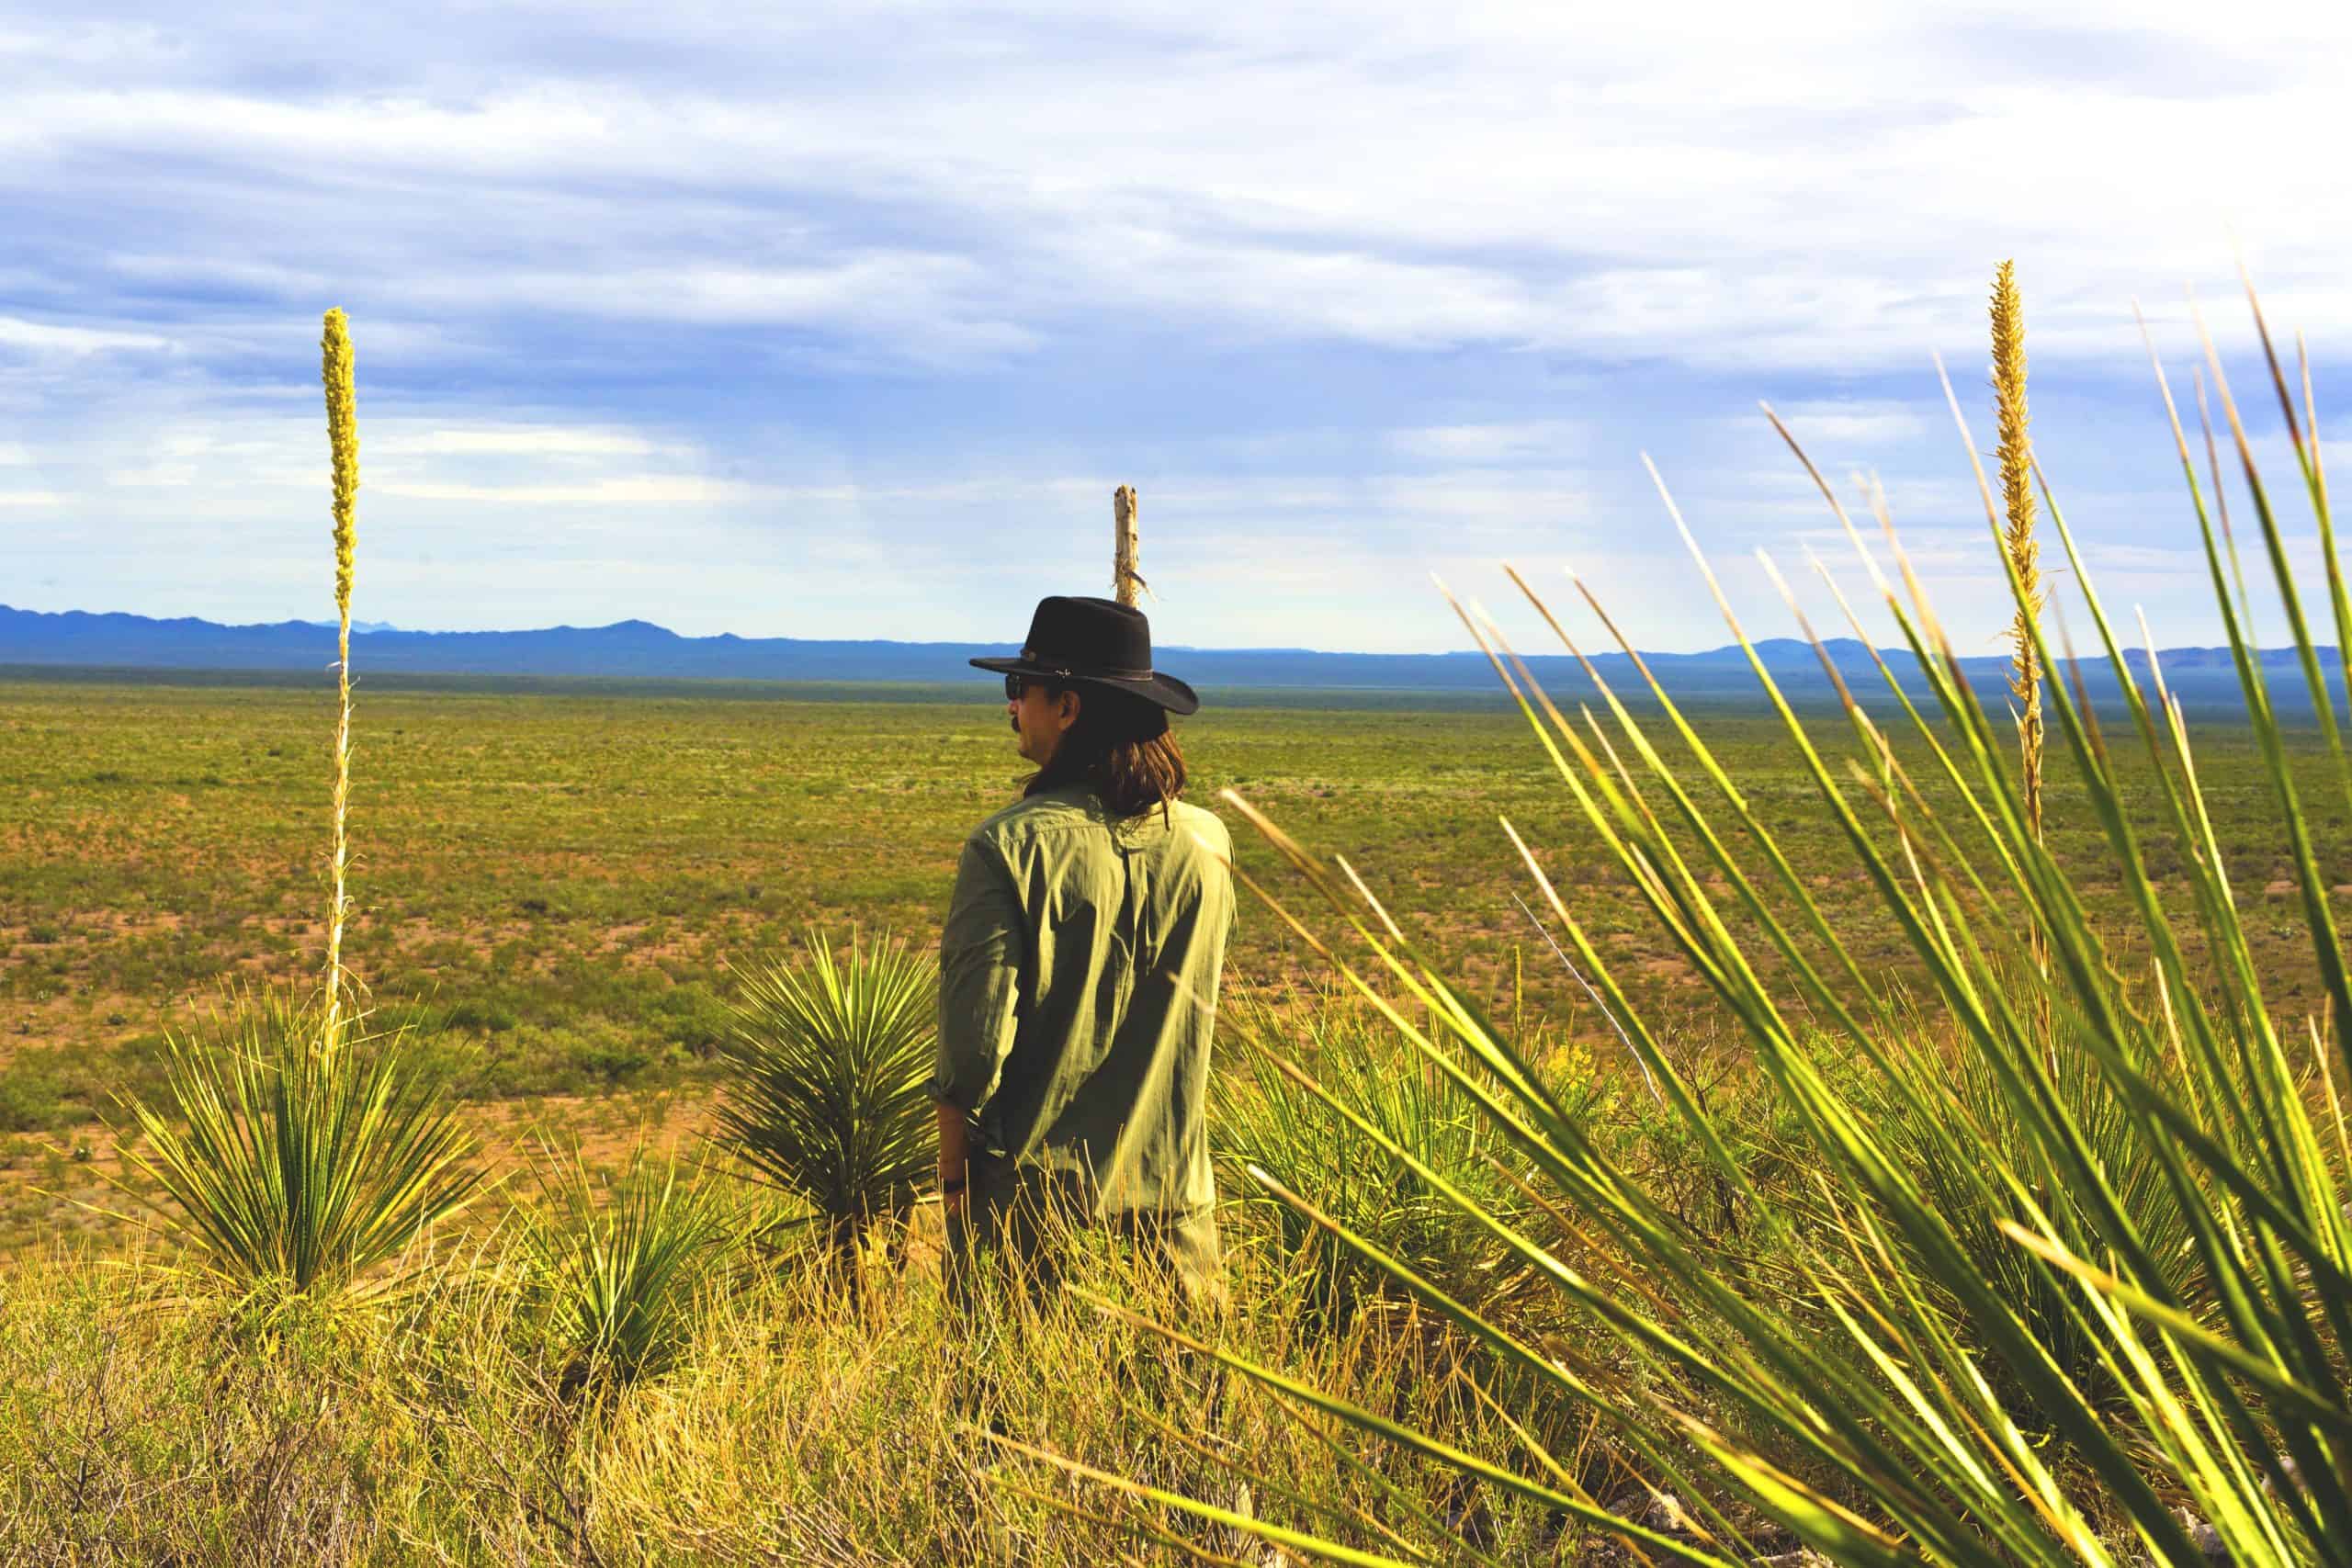 Best things to do in Chihuahua Mexico - Juan Pablo Carvajal with sotol plants overlooking field